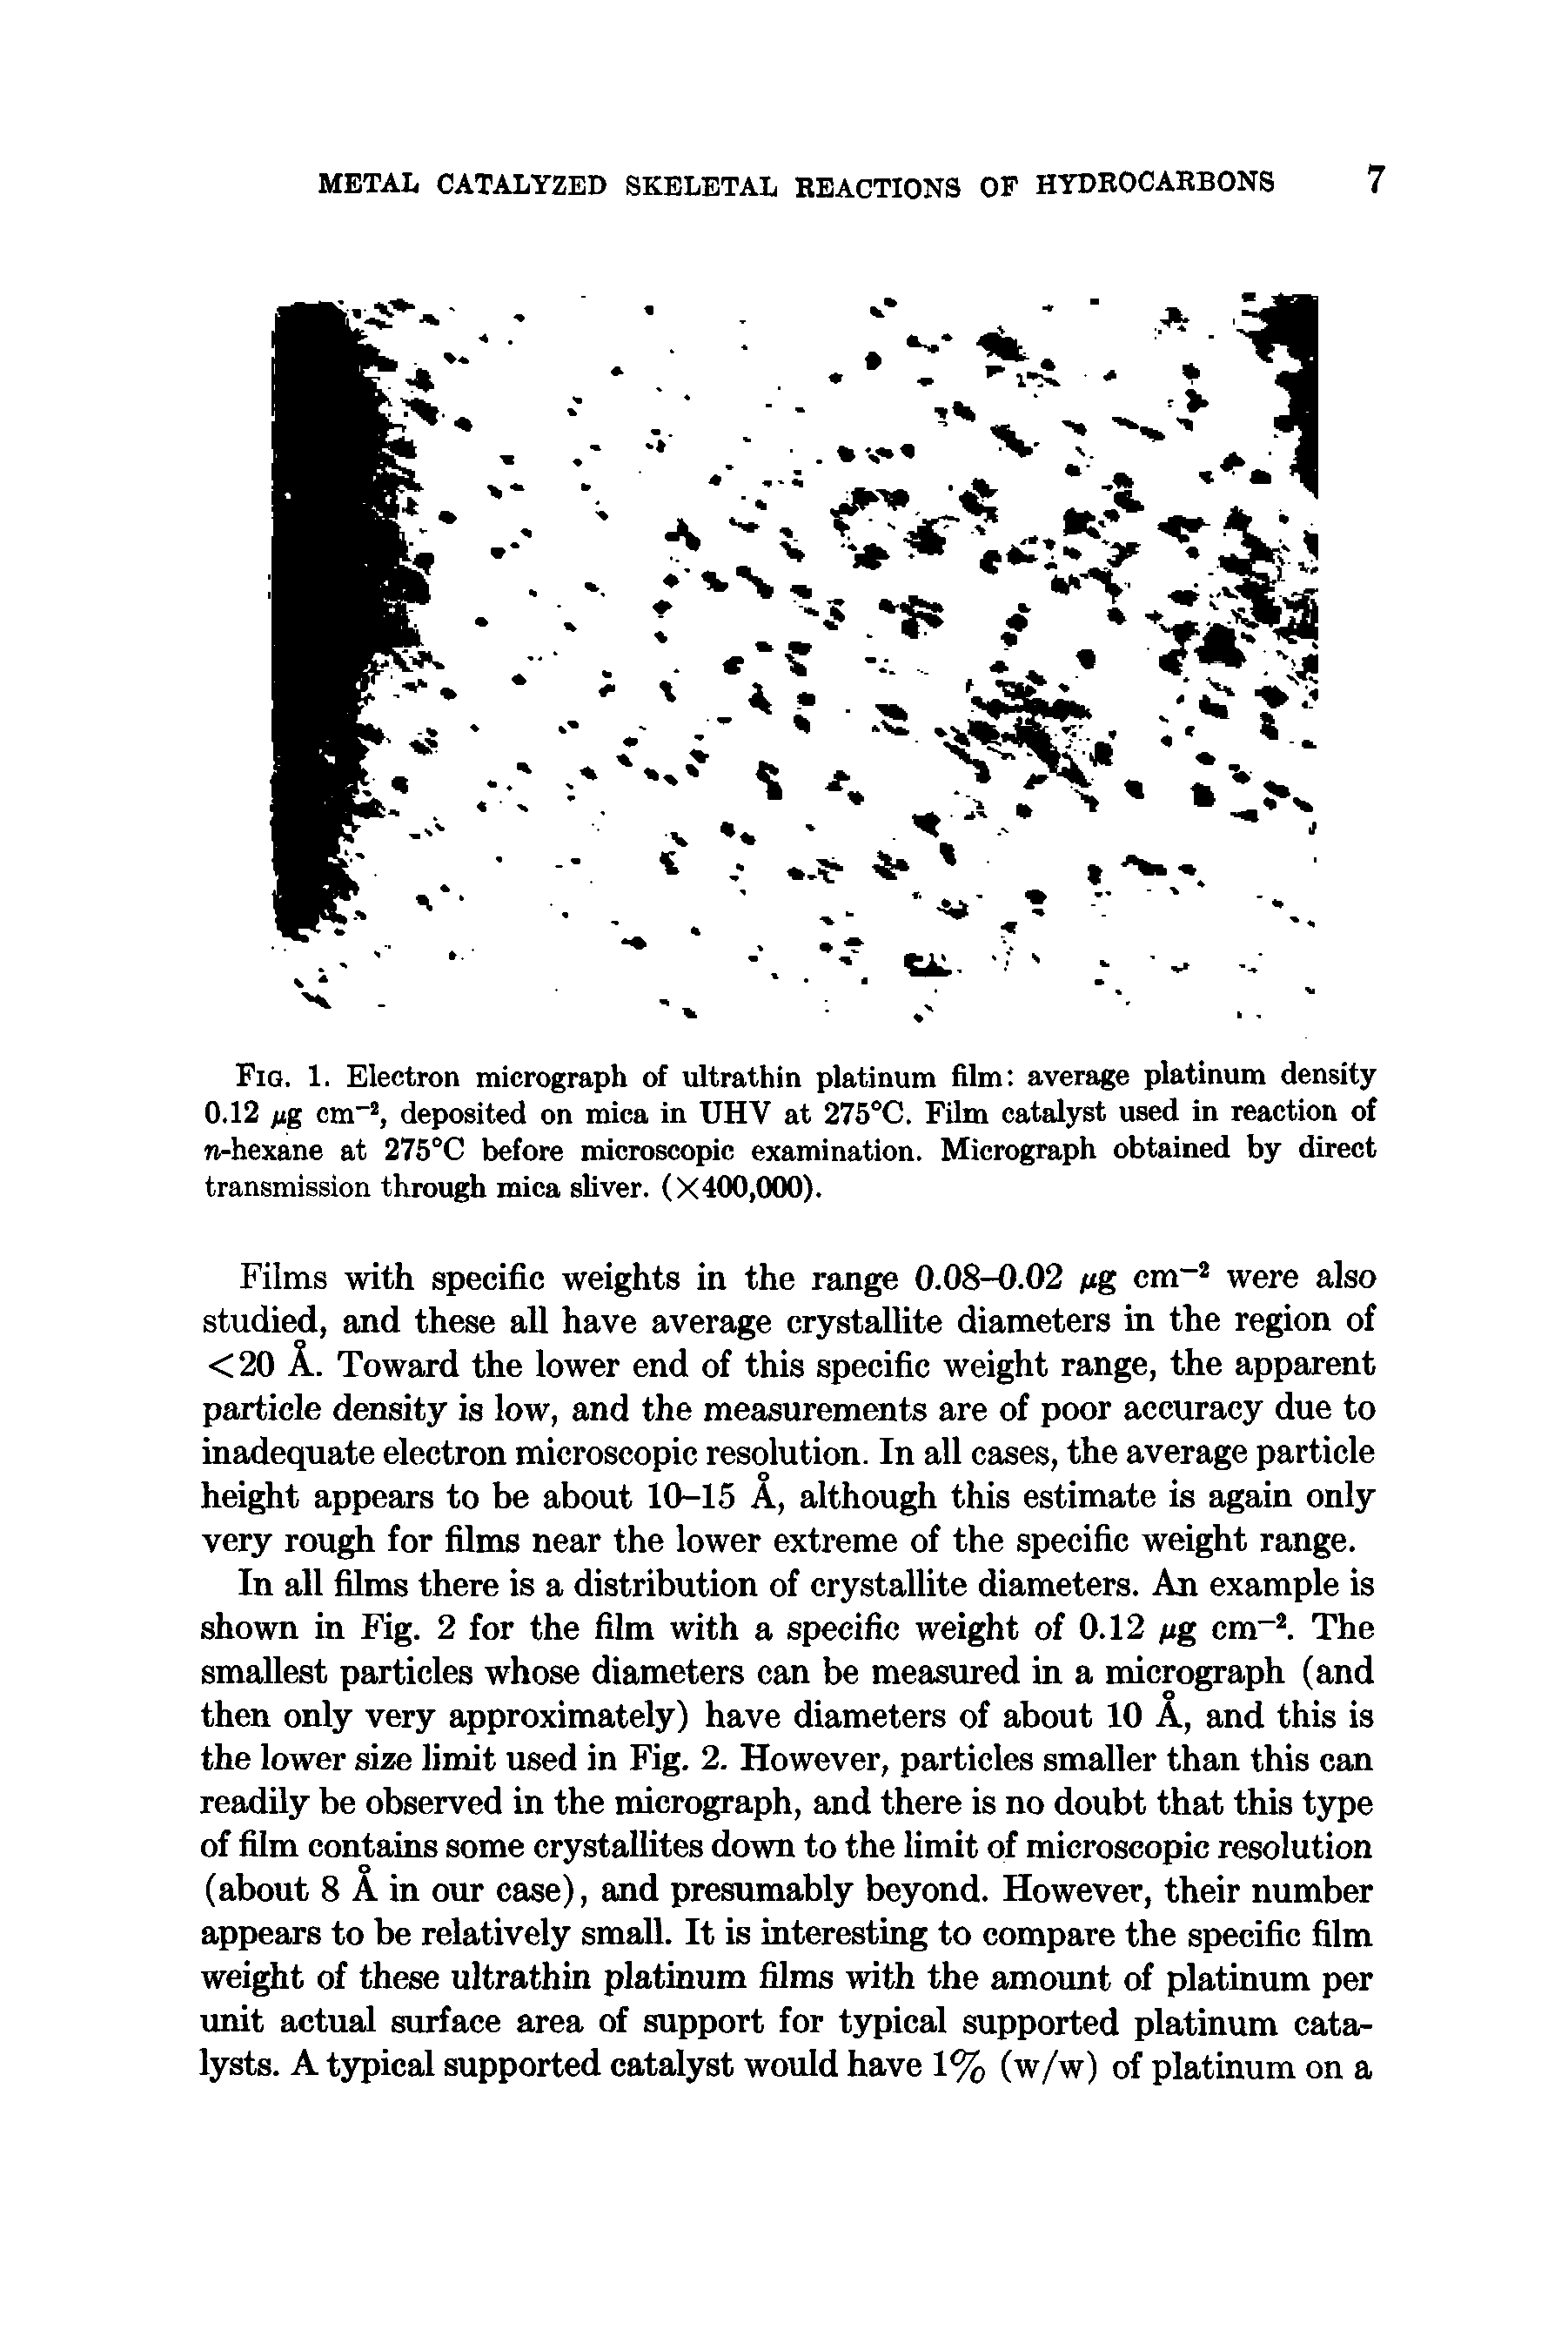 Fig. 1. Electron micrograph of ultrathin platinum film average platinum density 0.12 jug cm-2, deposited on mica in UHV at 275°C. Film catalyst used in reaction of n-hexane at 275°C before microscopic examination. Micrograph obtained by direct transmission through mica sliver. (X400,000).